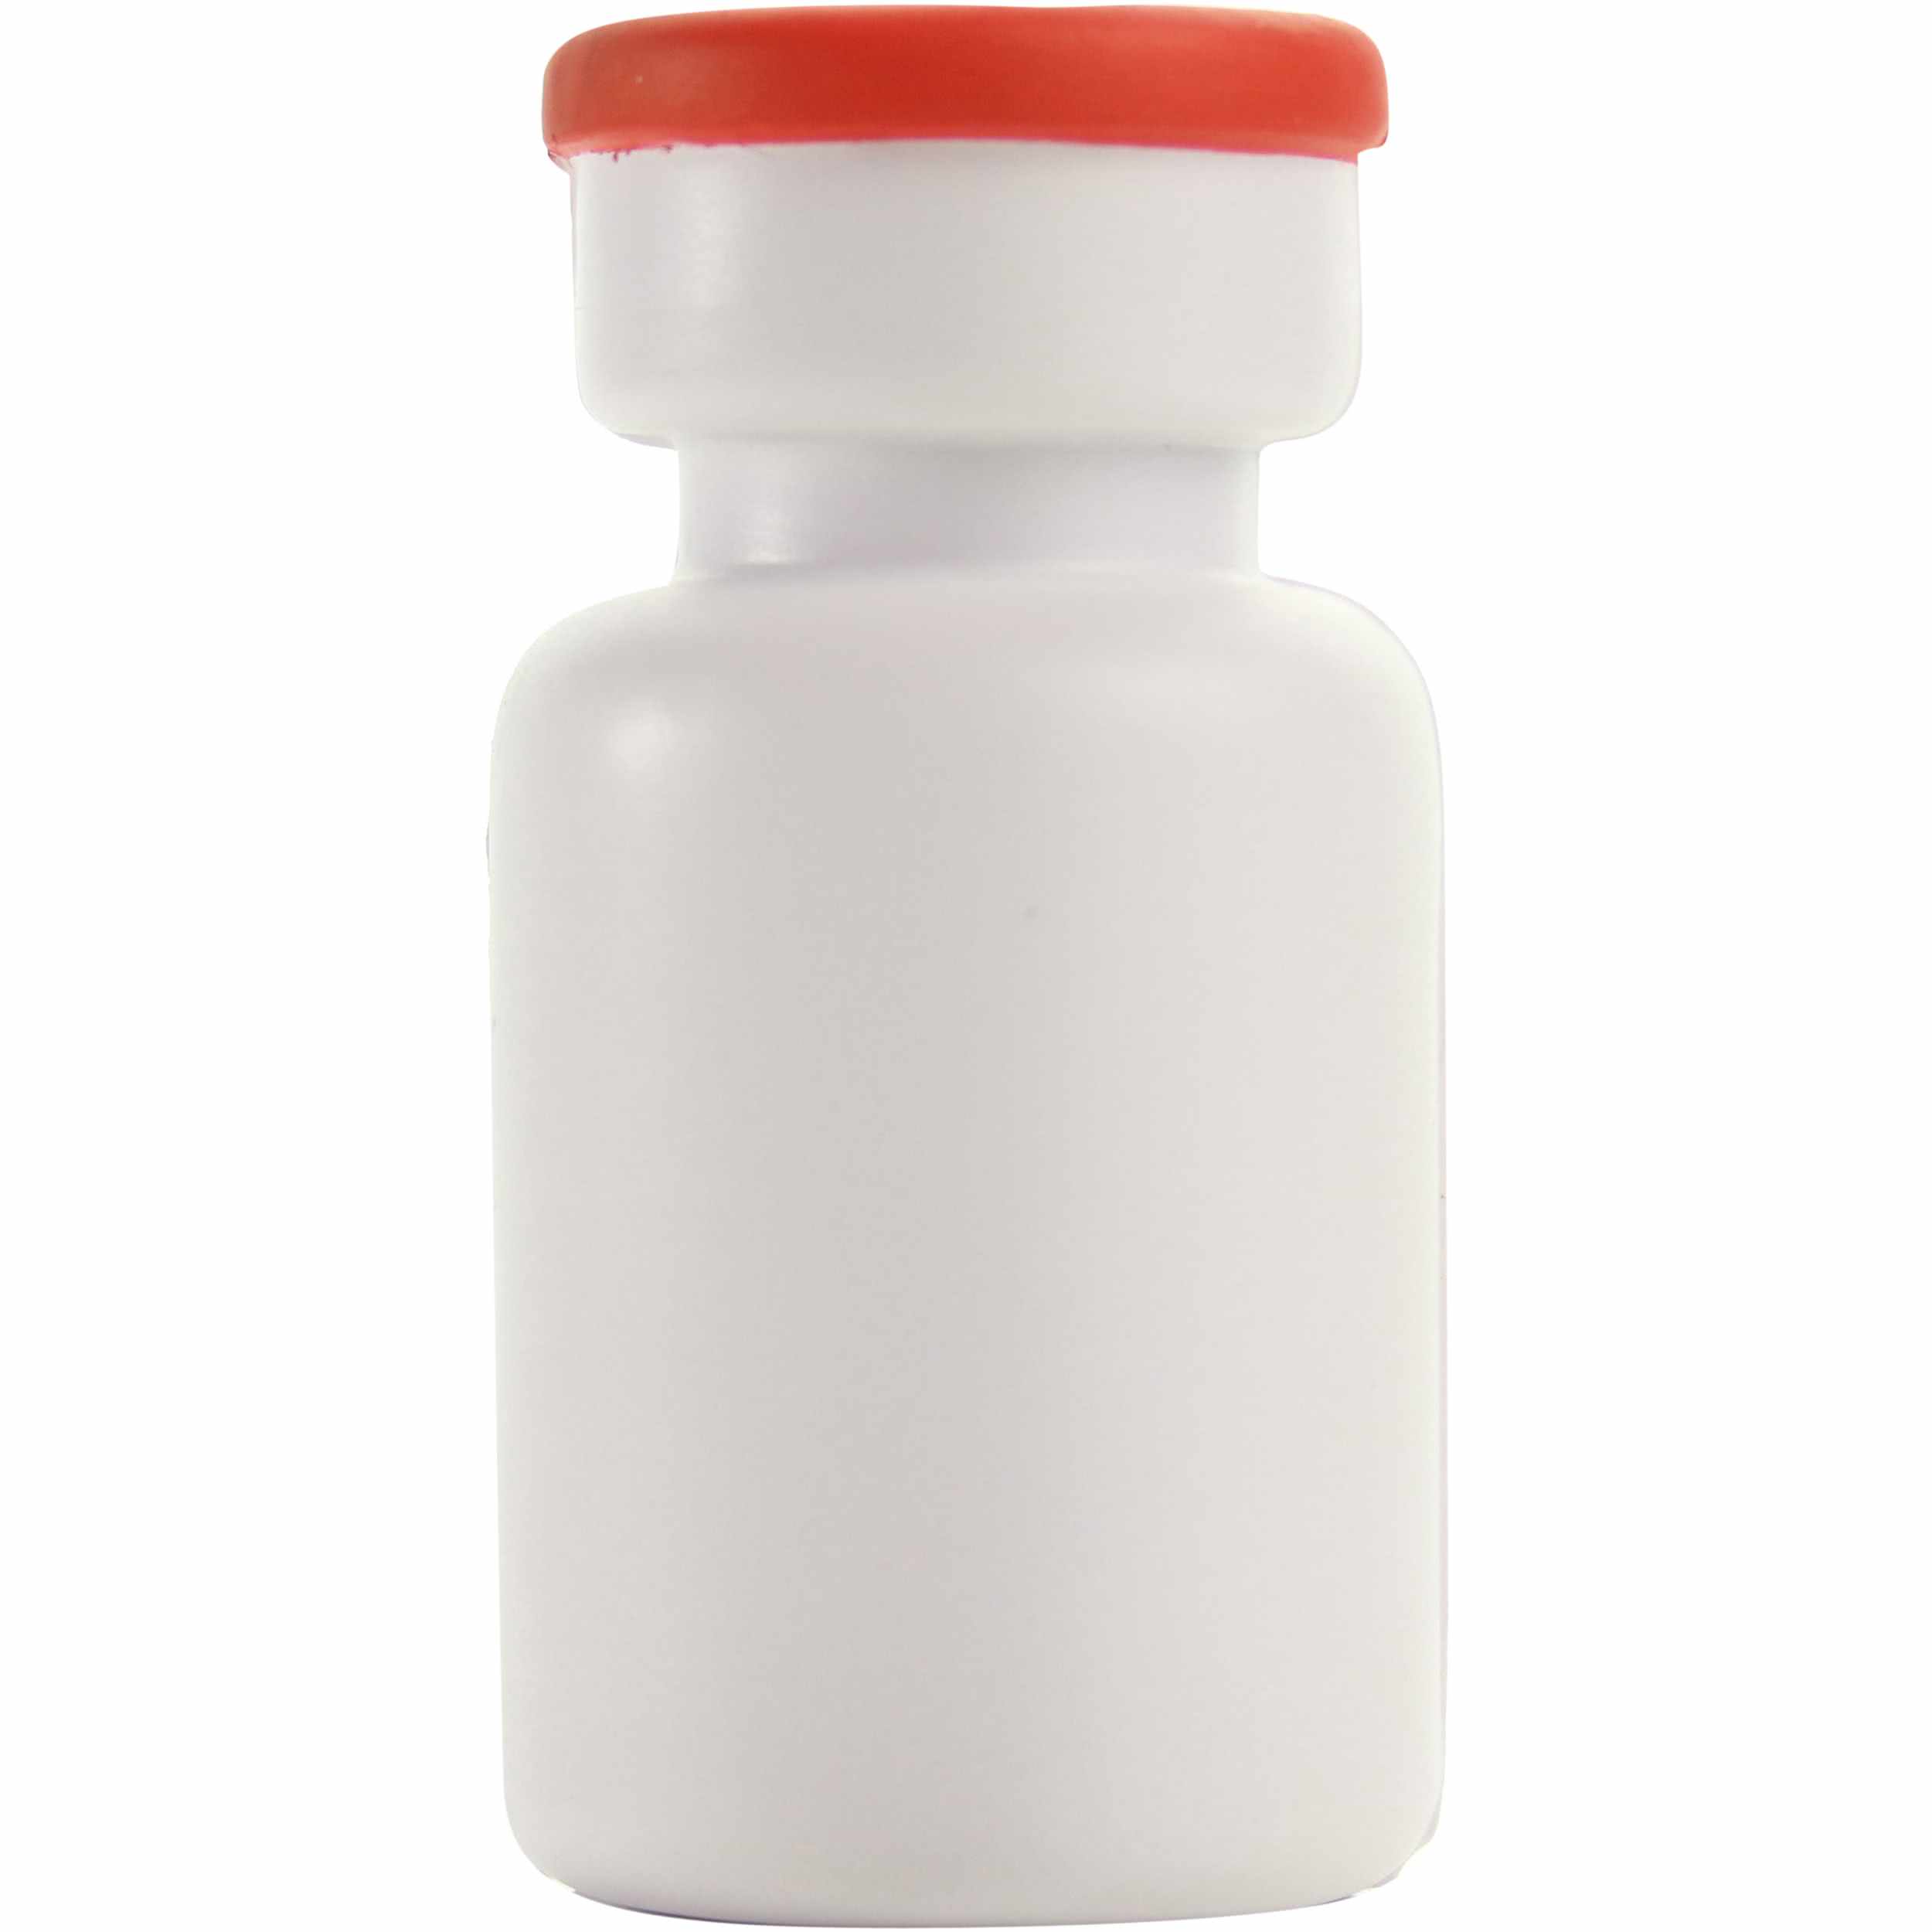 Promotional Pill Bottle Stress Toys with Custom Logo for $0.80 Ea.